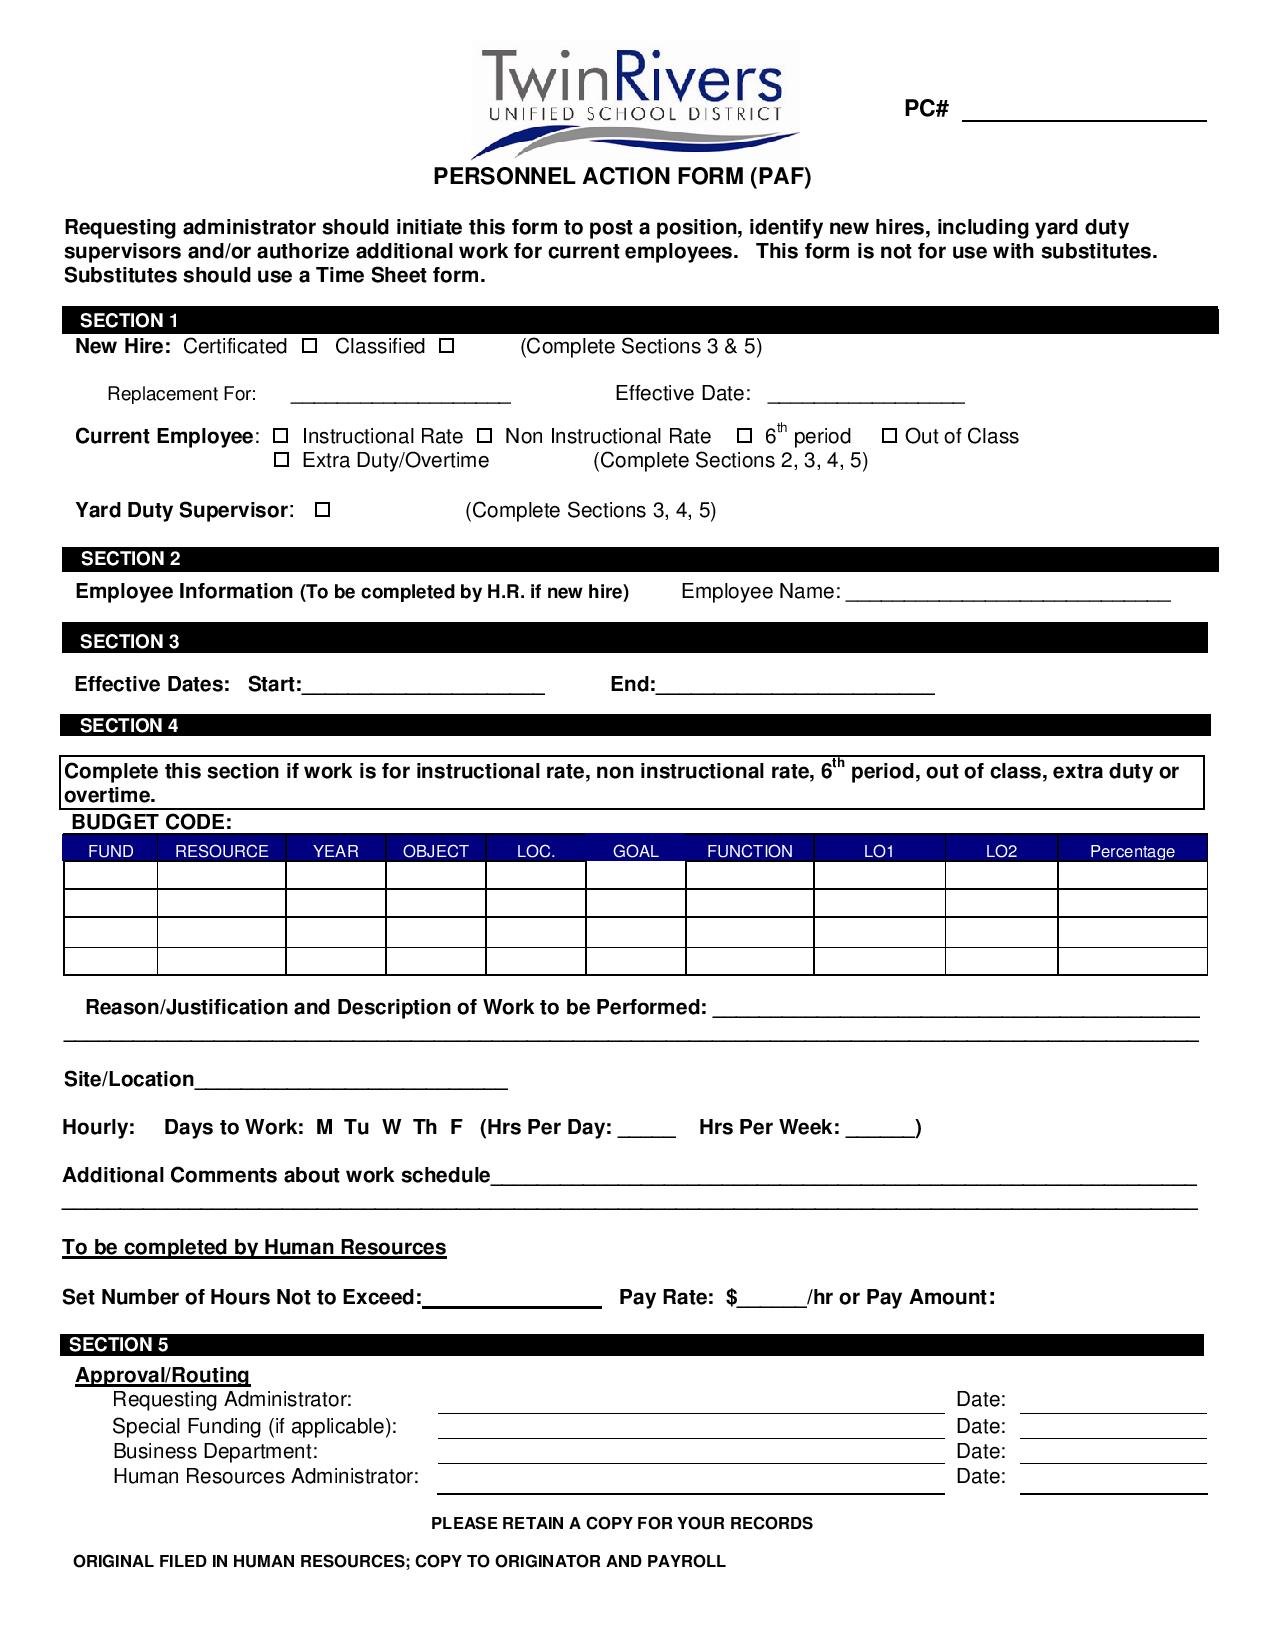 hr personnel action form in pdf page 0011